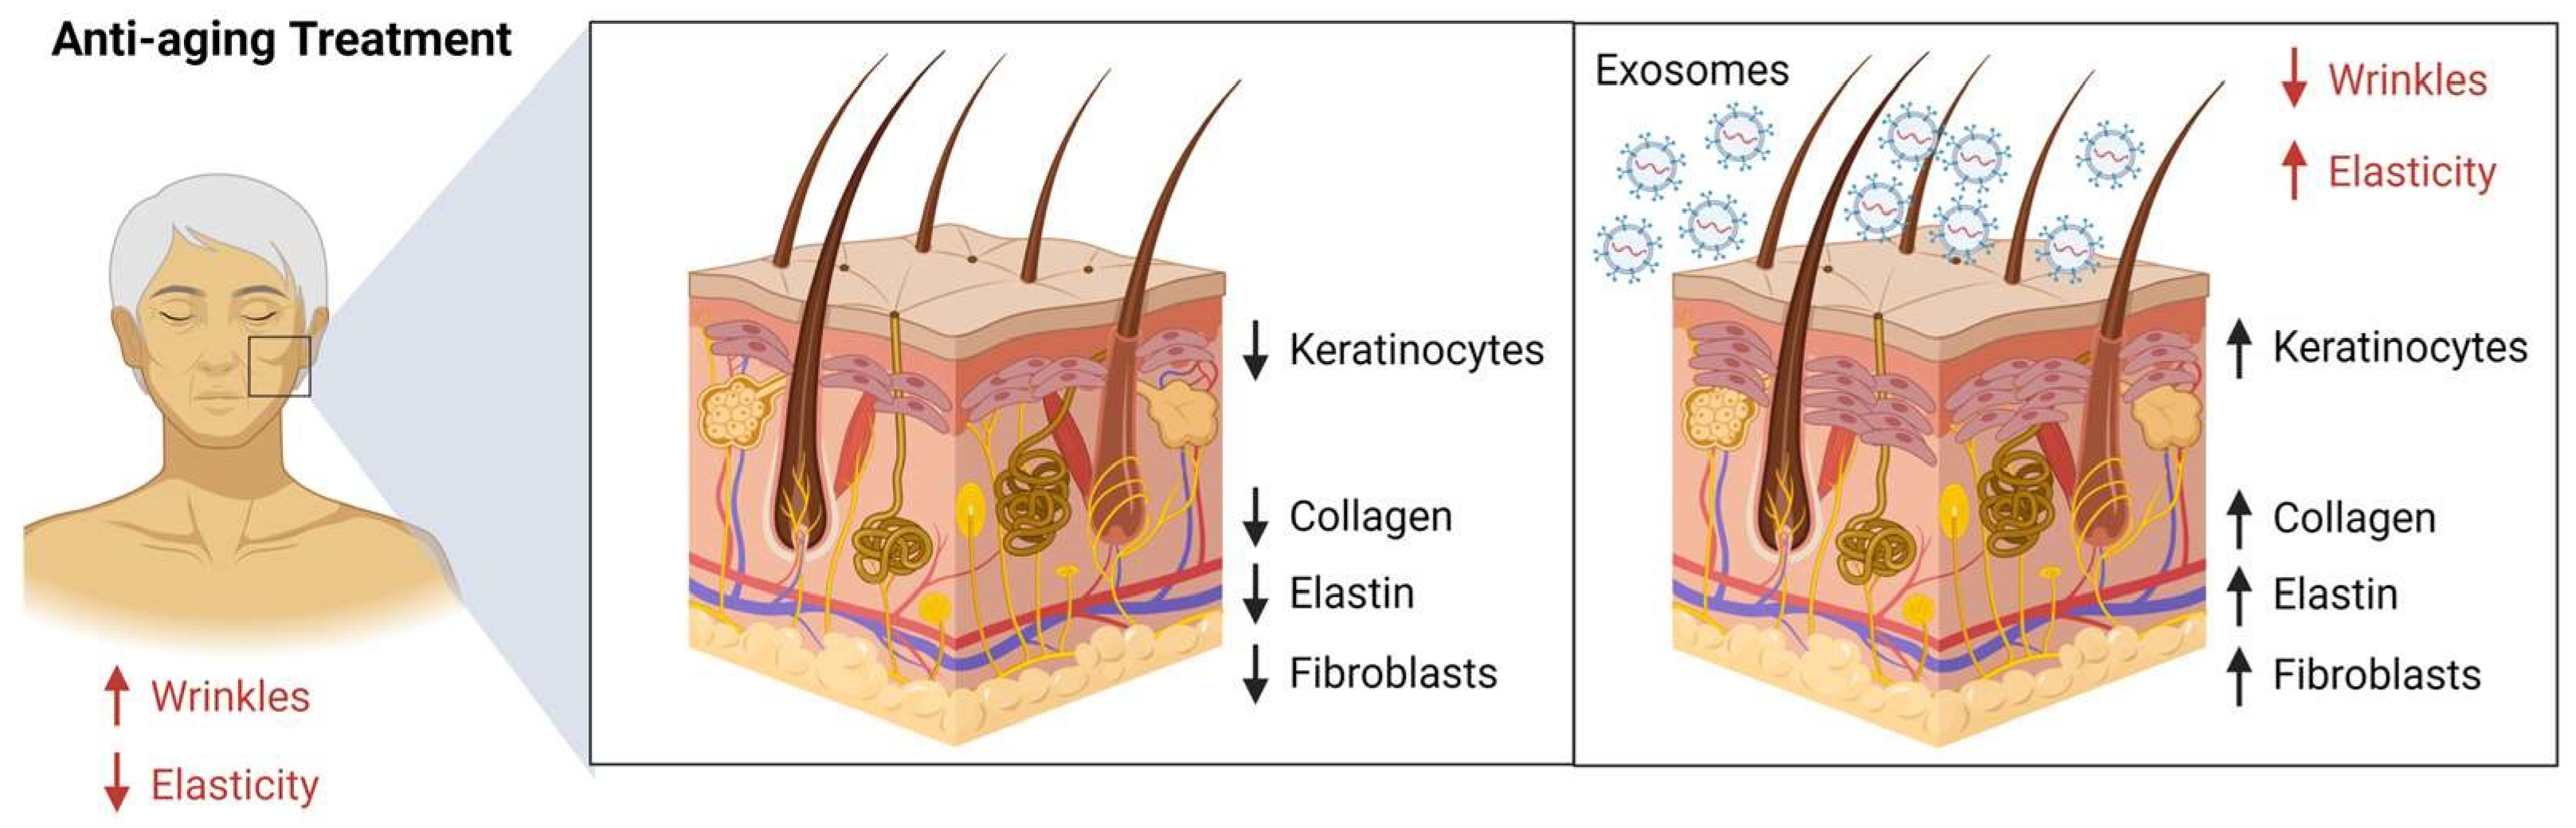 Cosmetics | Free Full-Text | Therapeutic Values of Exosomes in Cosmetics,  Skin Care, Tissue Regeneration, and Dermatological Diseases